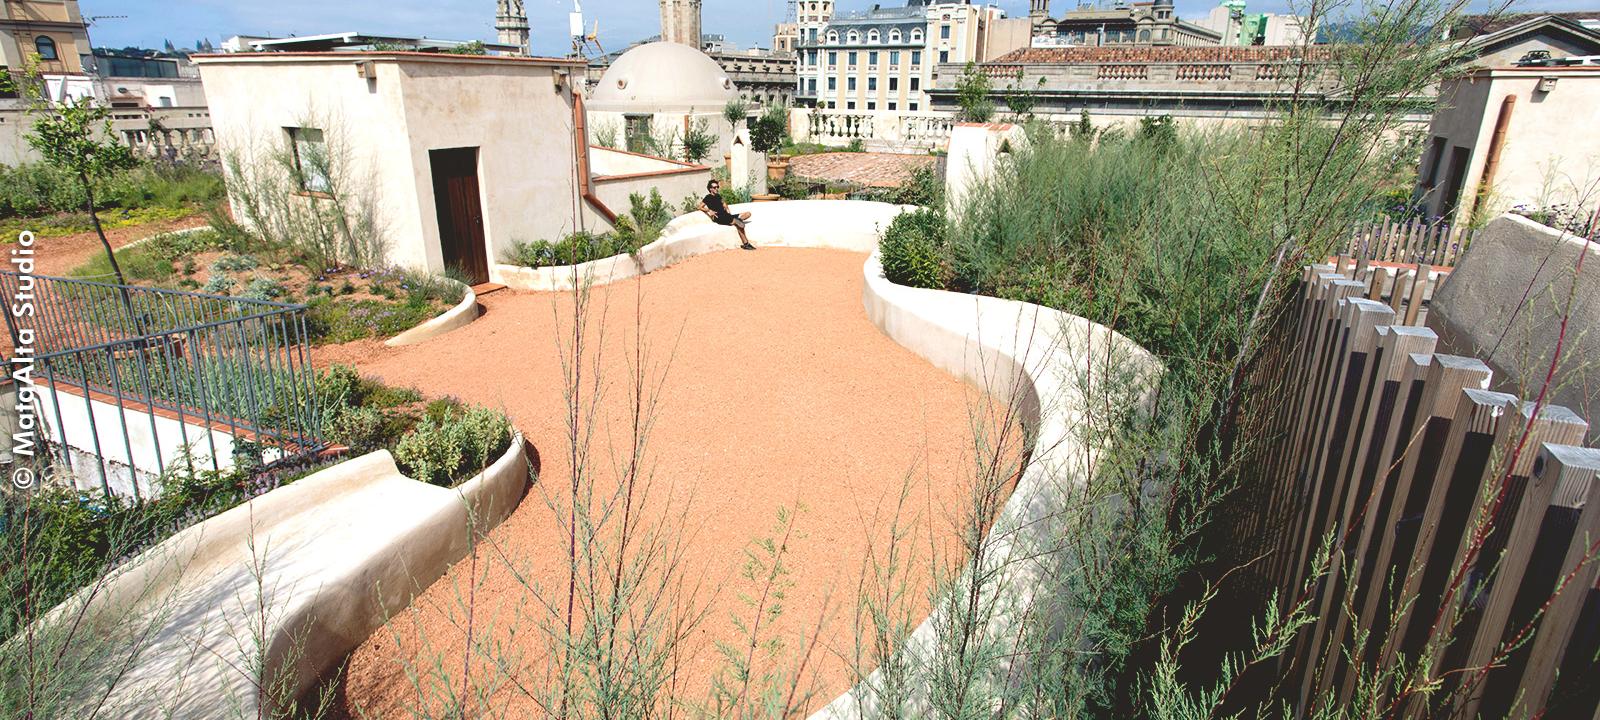 Roof garden with historical background